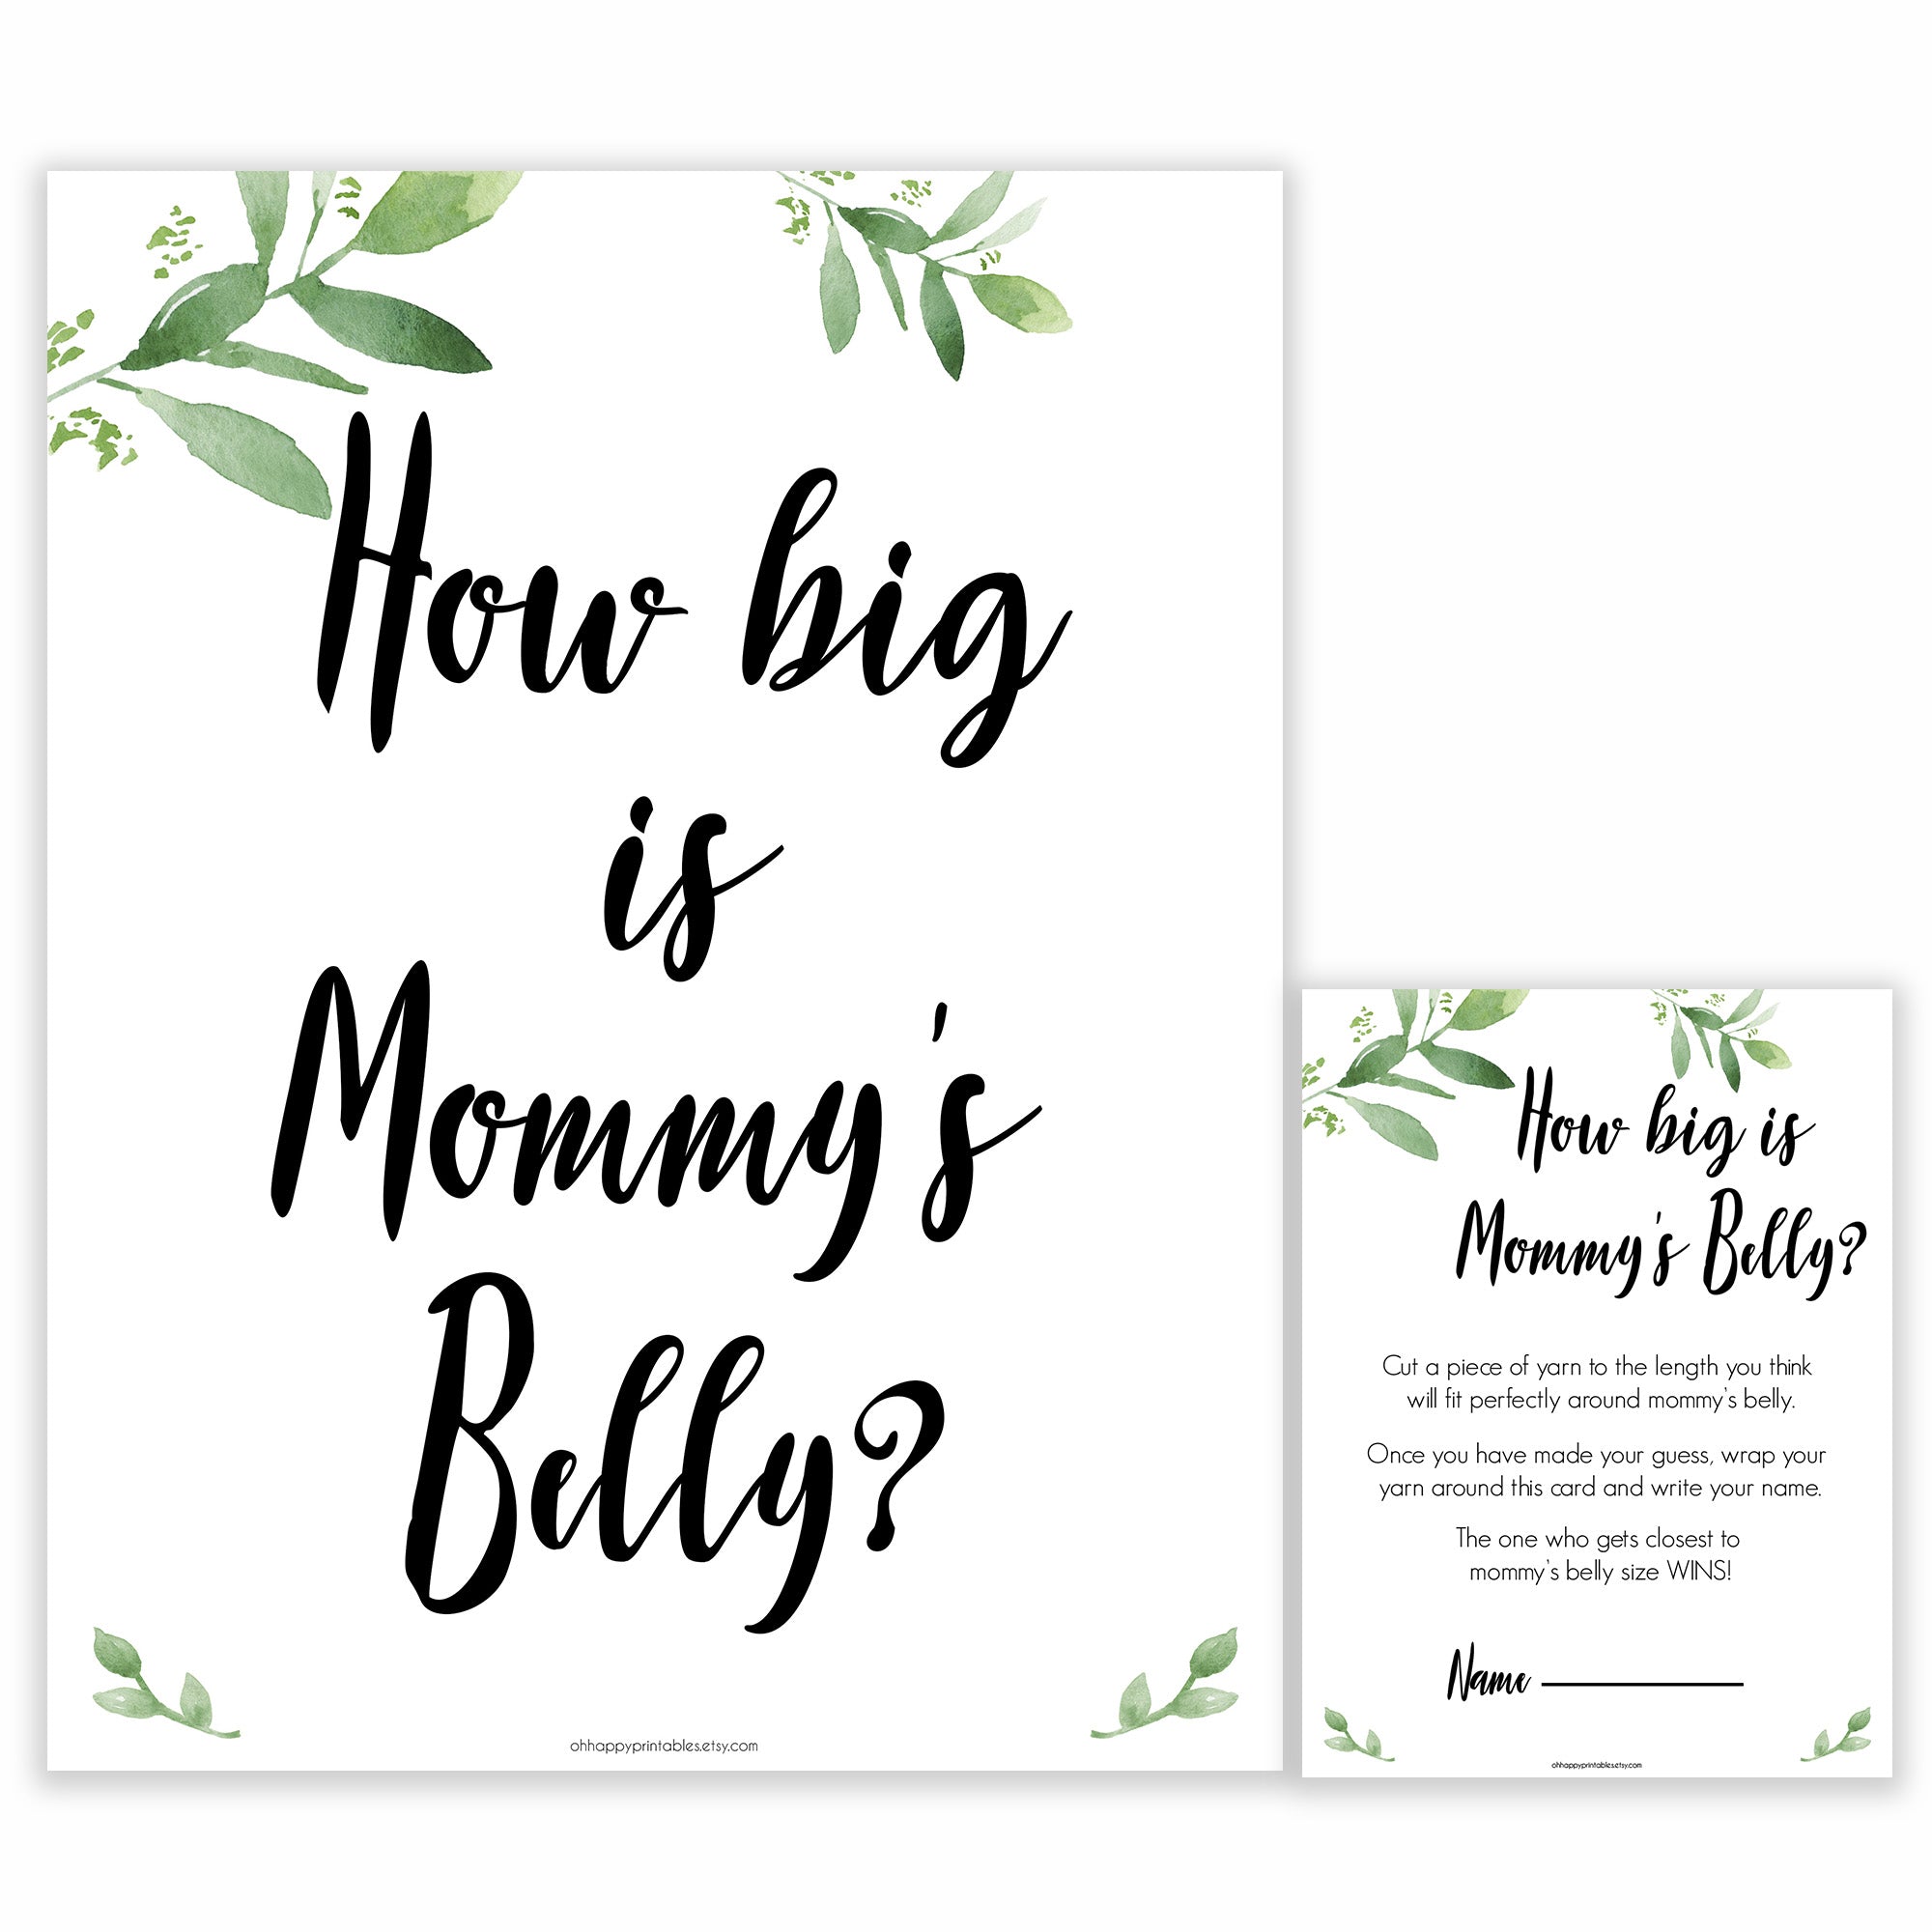 Botanical How Big Is Mommy's Belly, Mommys Belly Game, Baby Shower Games, Greenery Baby Games, Green Guess Mommys Belly, Baby Games, printable baby games